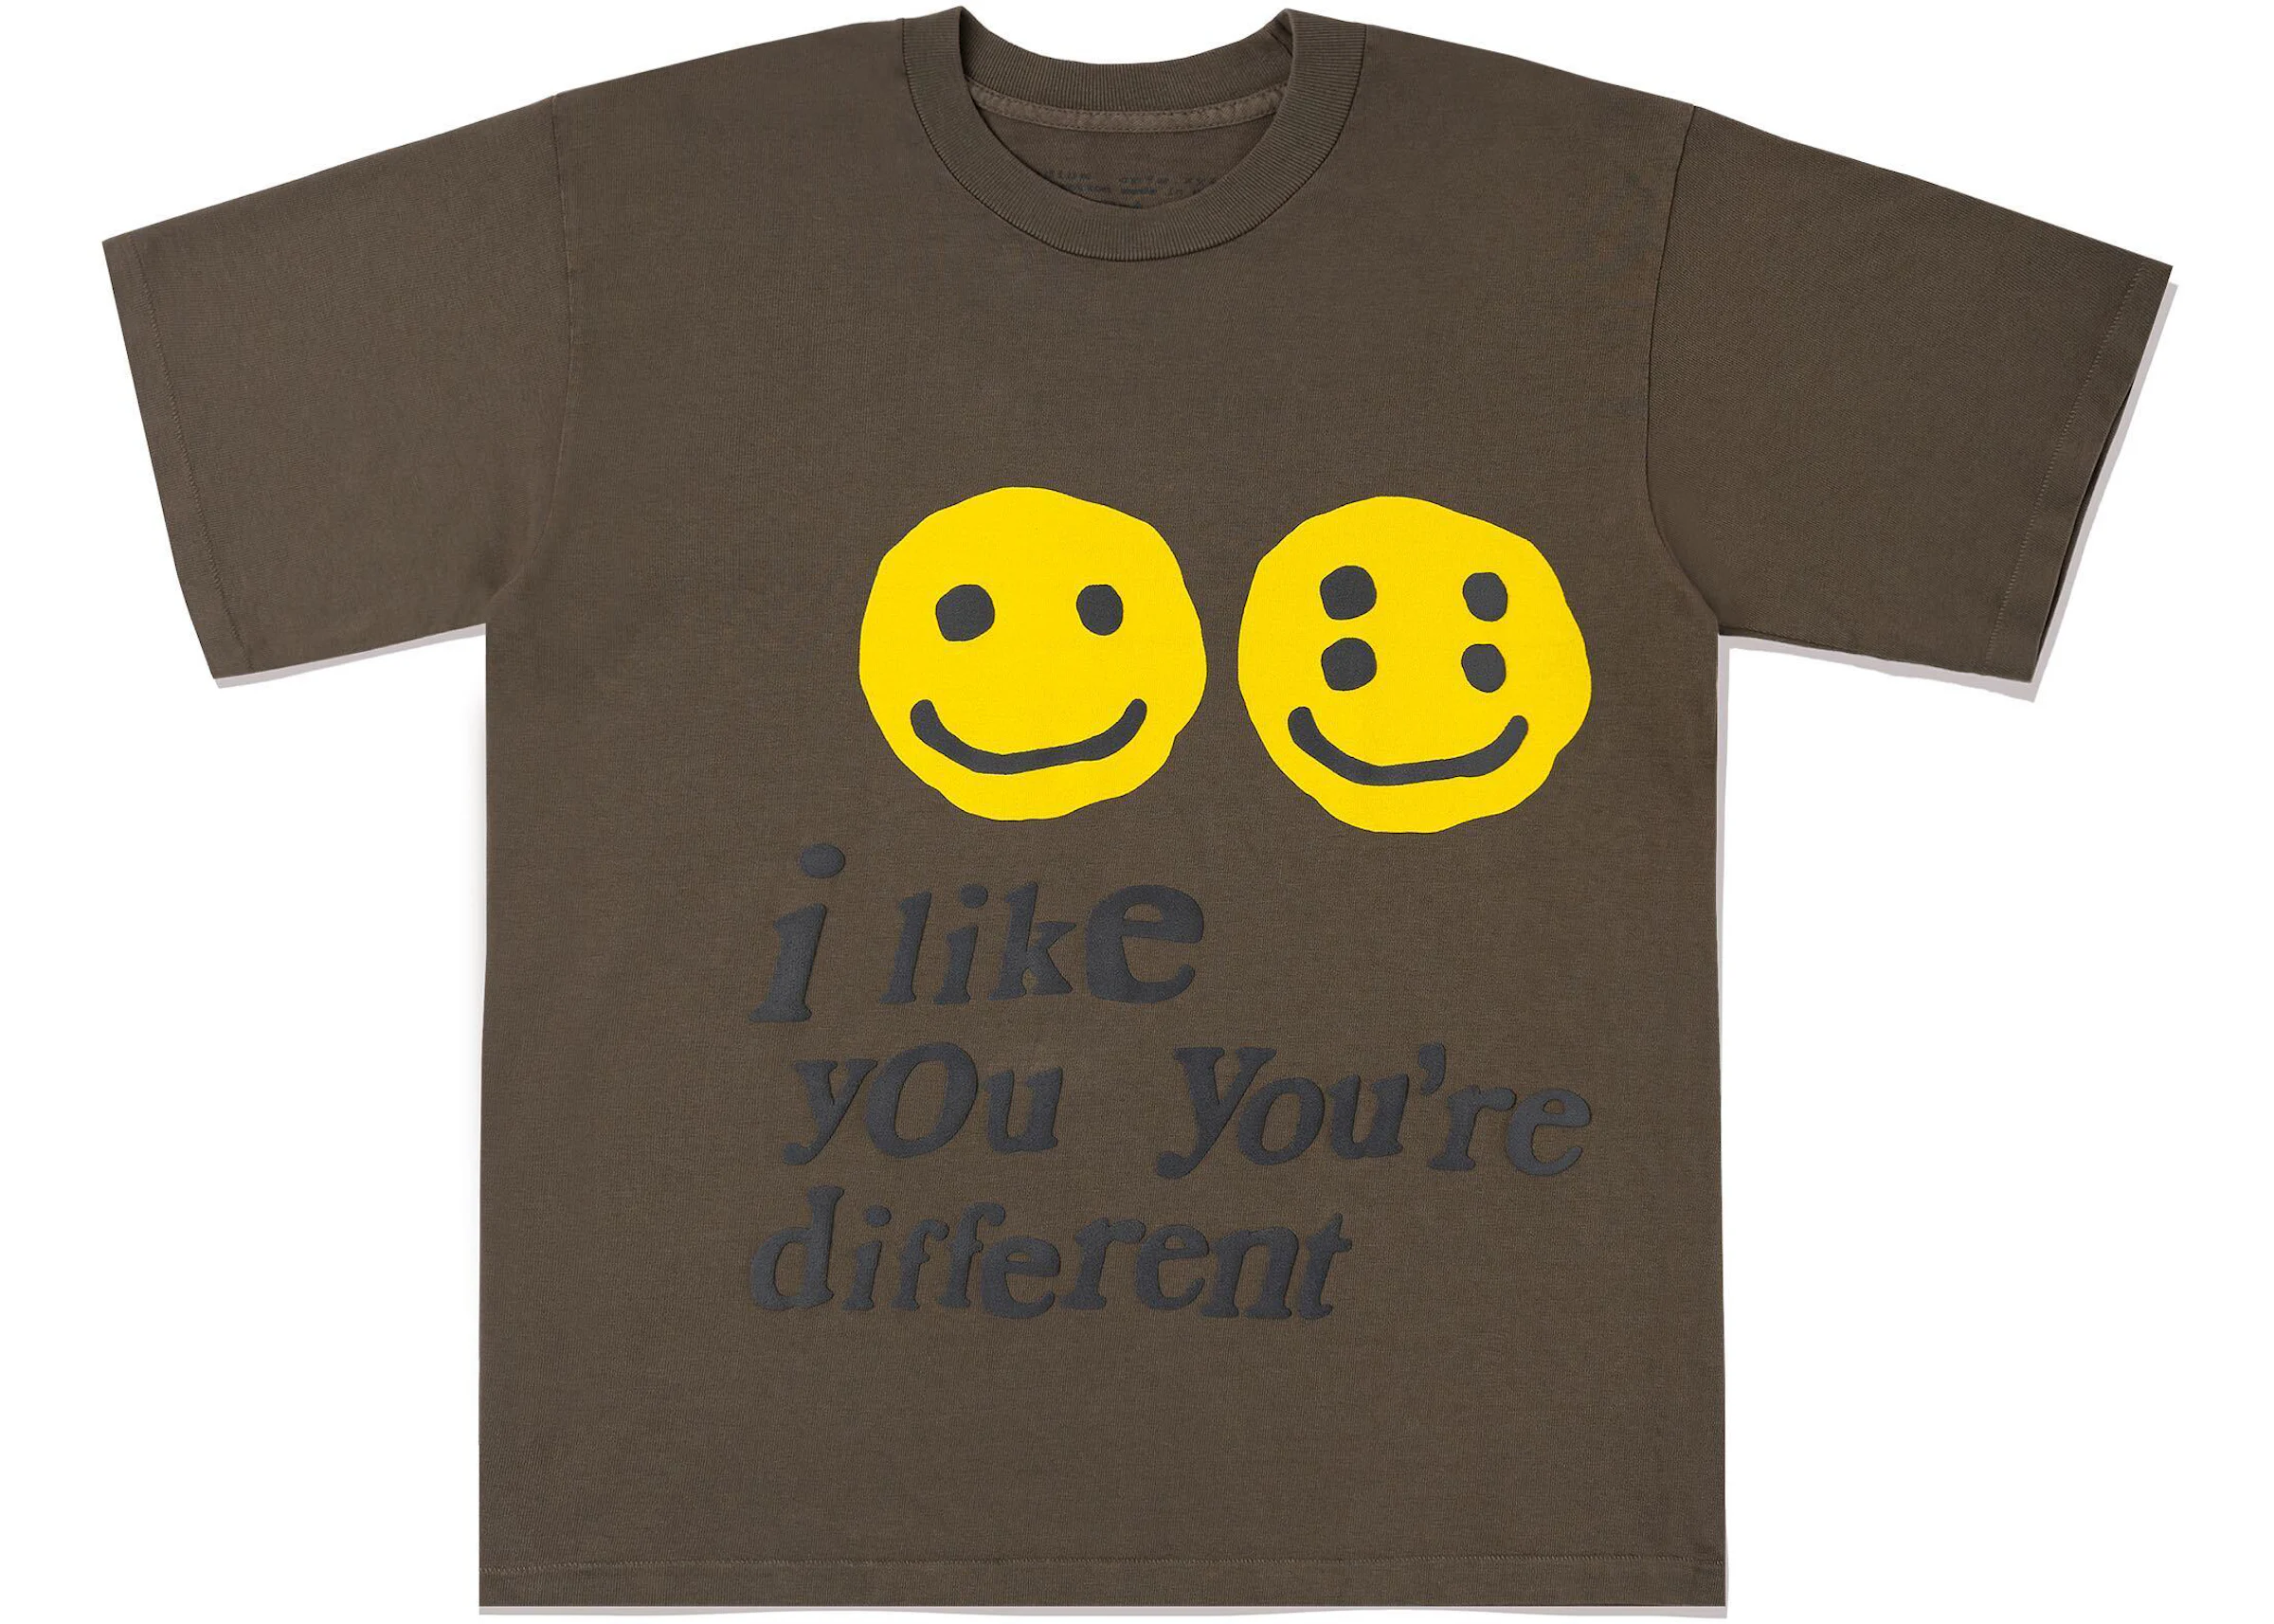 Cactus Plant Flea Market I Like You You're Different T-Shirt Green